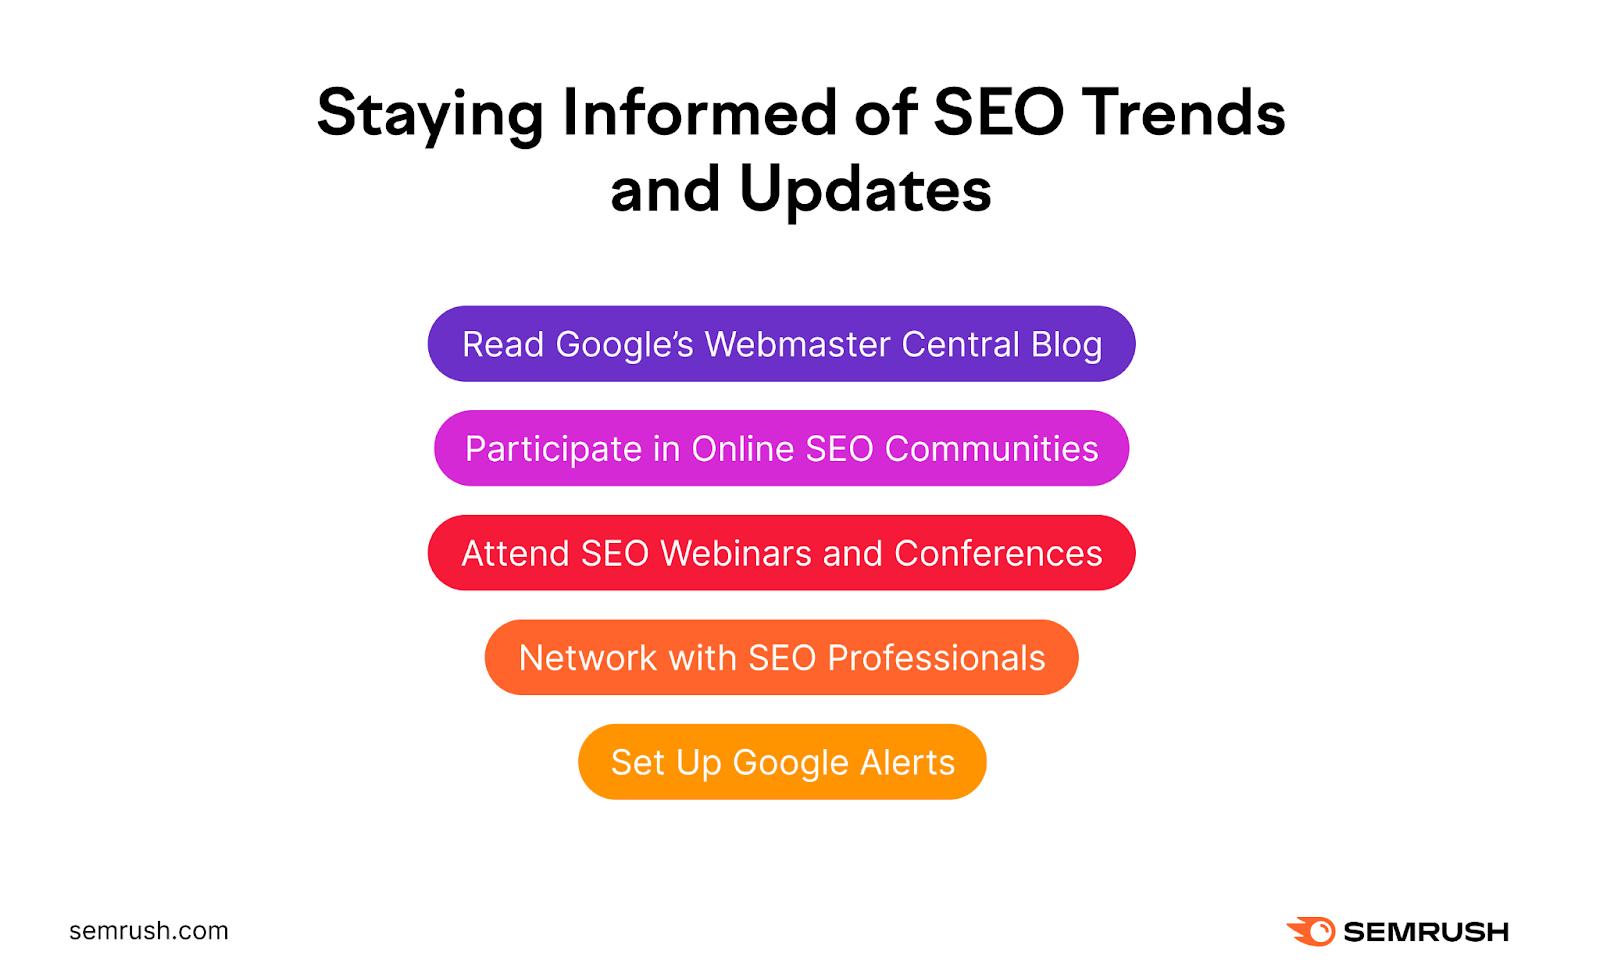 A visual listing the tips of staying informed of SEO trends and updates